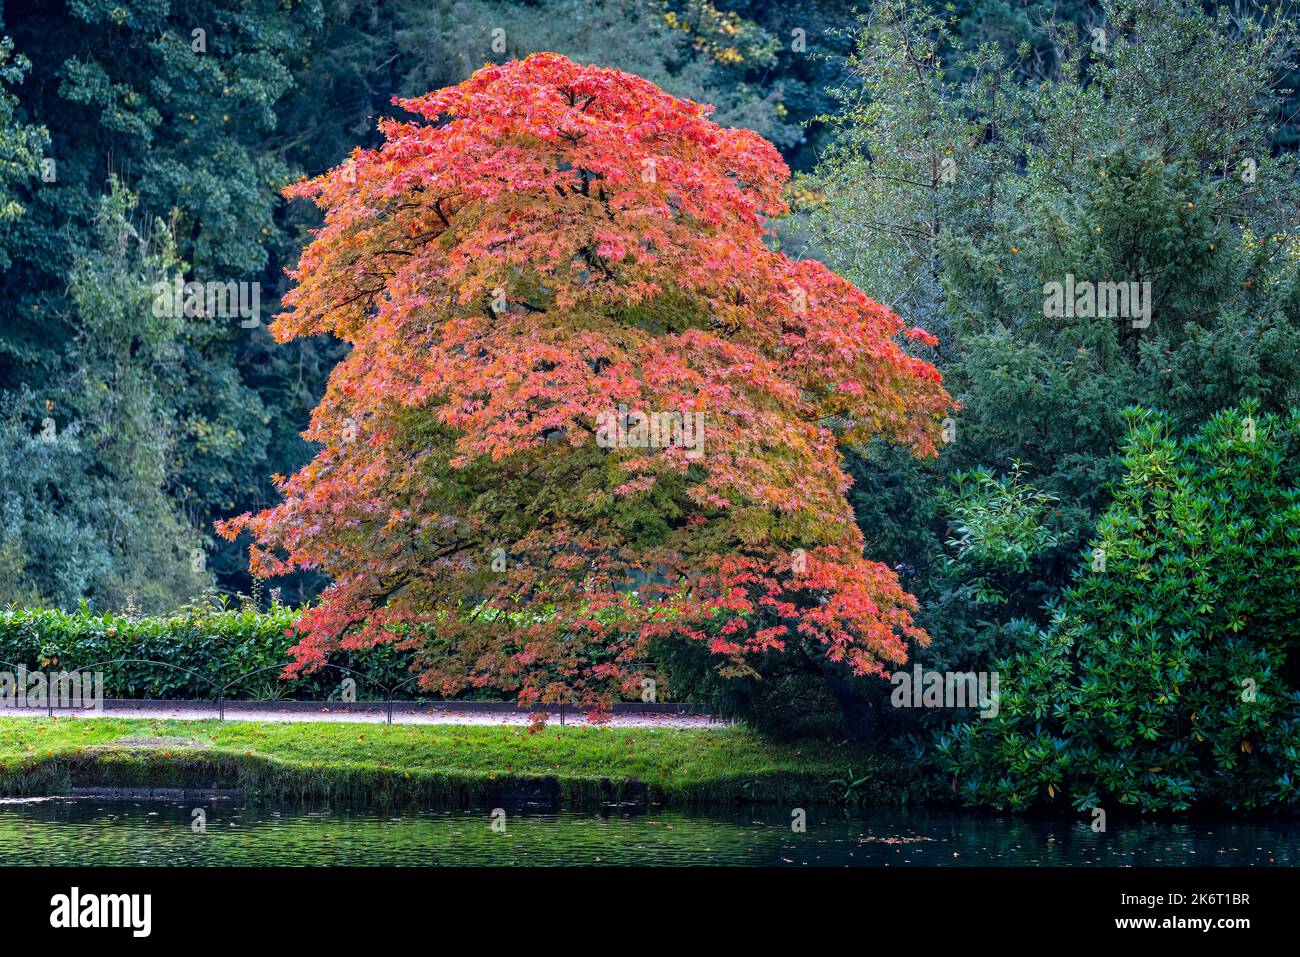 Vibrant red, gold, orange and yellow Acer Tree in full autumn foliage colours, Stock Photo